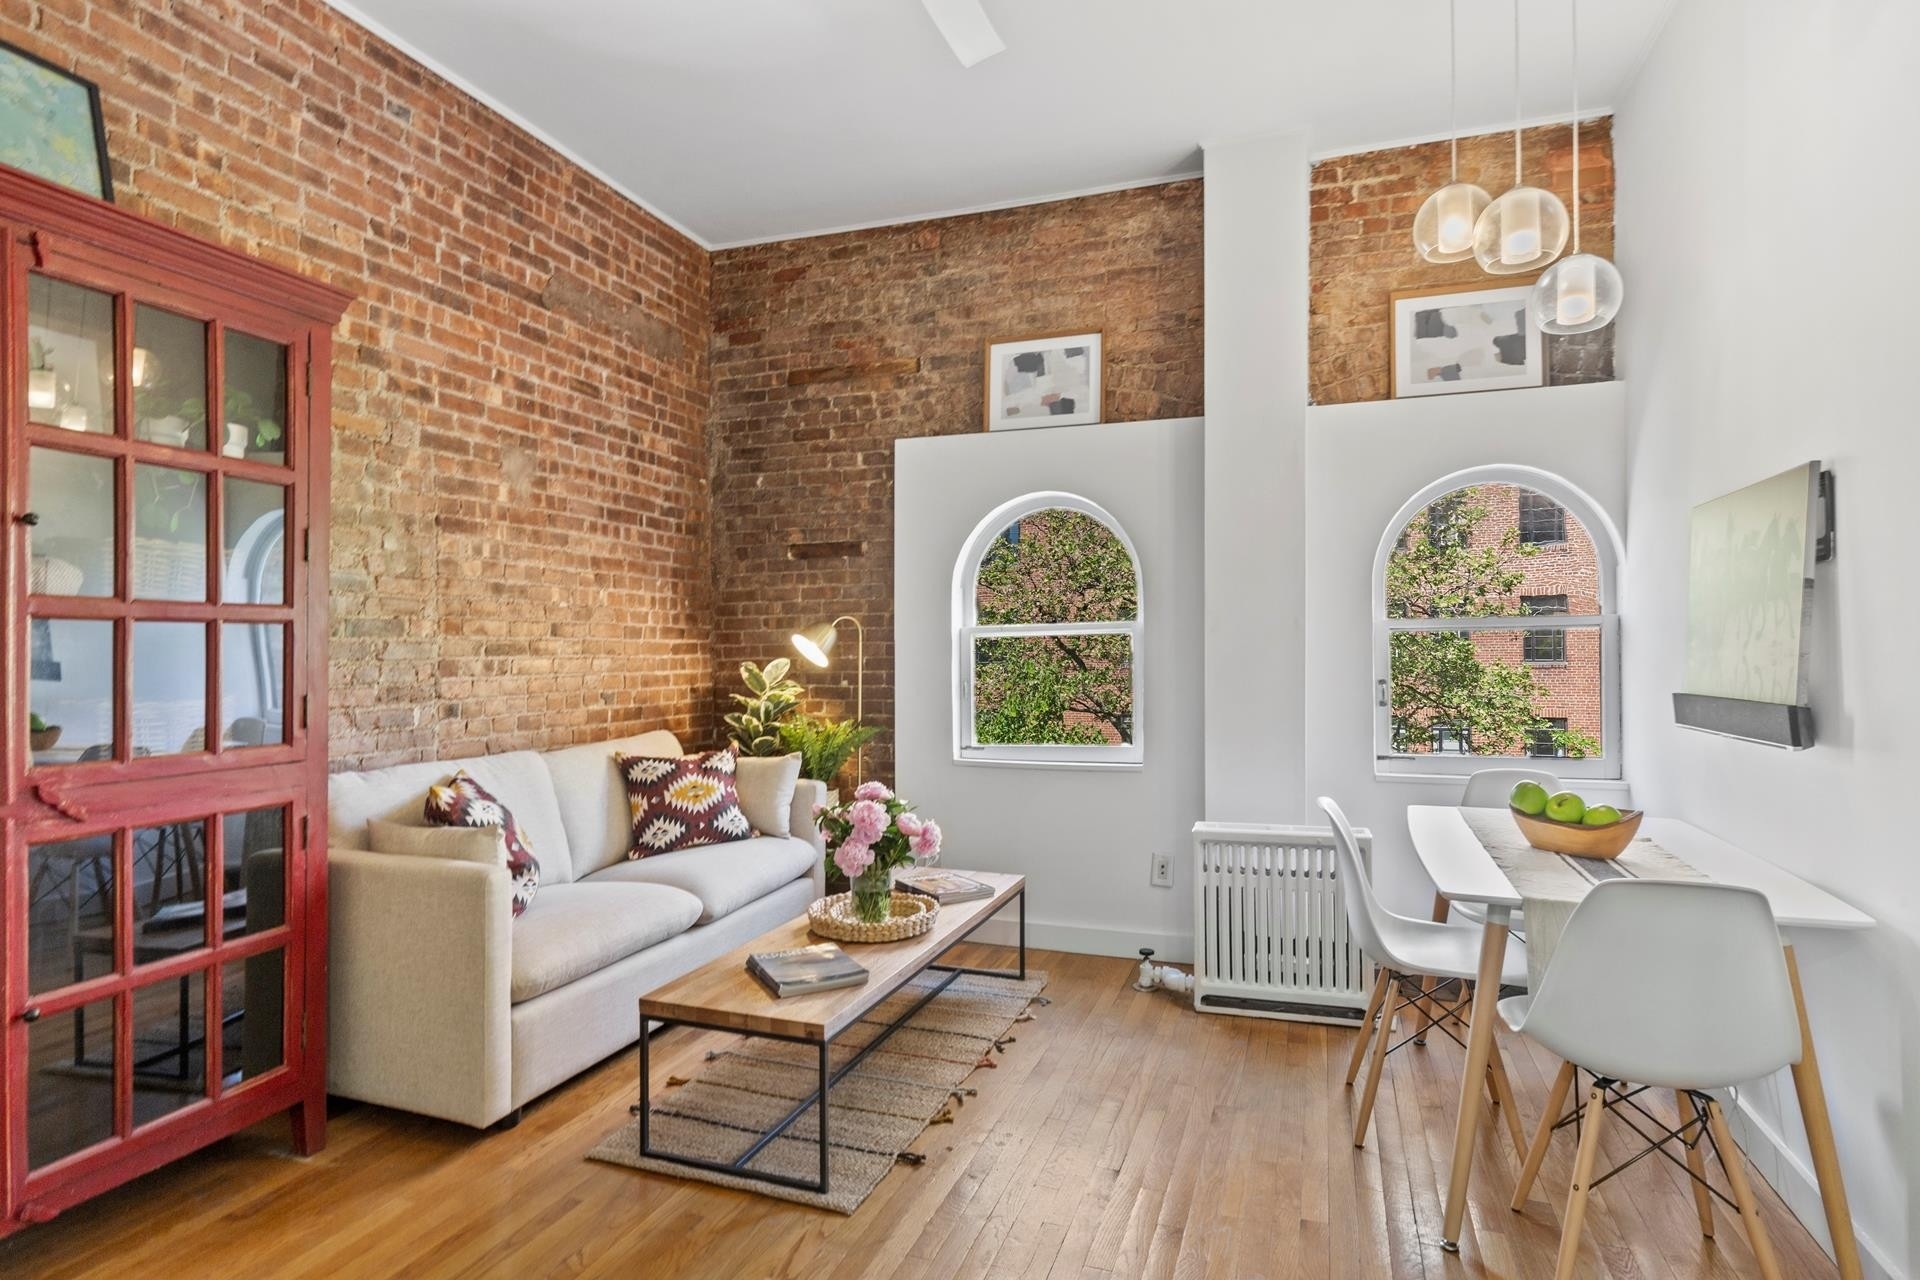 1. Co-op Properties at 115 8TH AVE , 9 Brooklyn